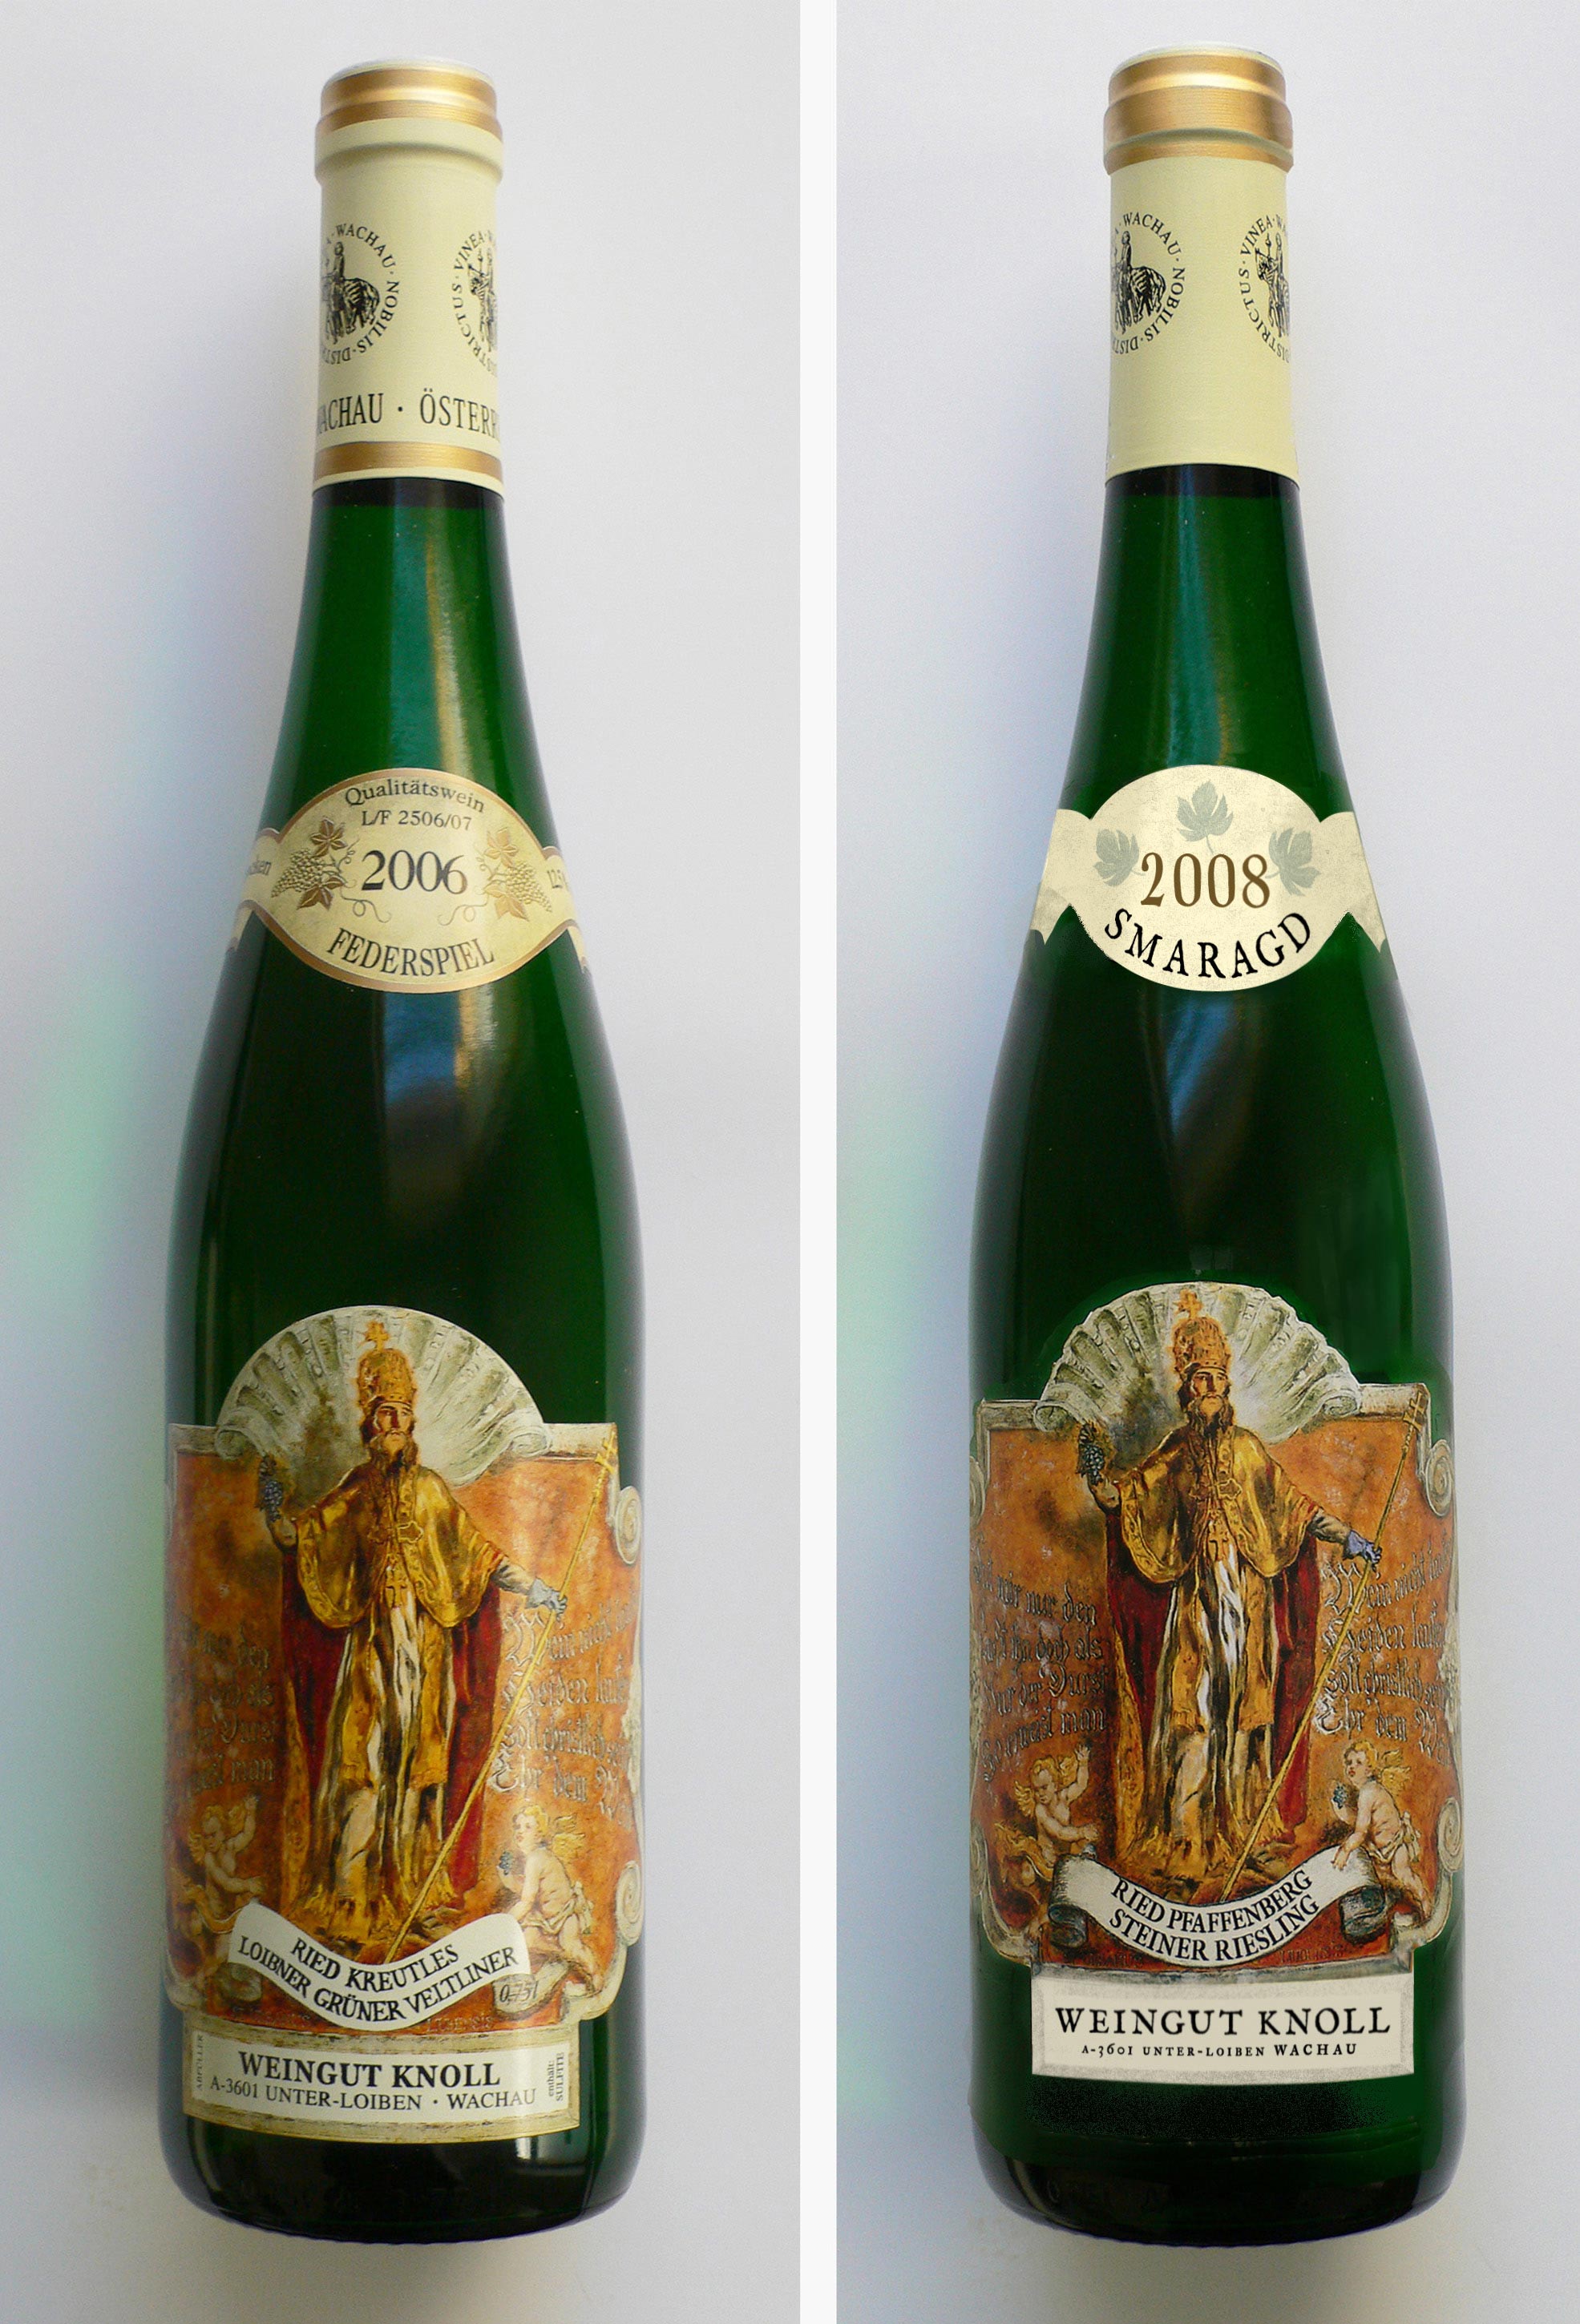 2 photos of the same wine bottle. Label differs slightly.